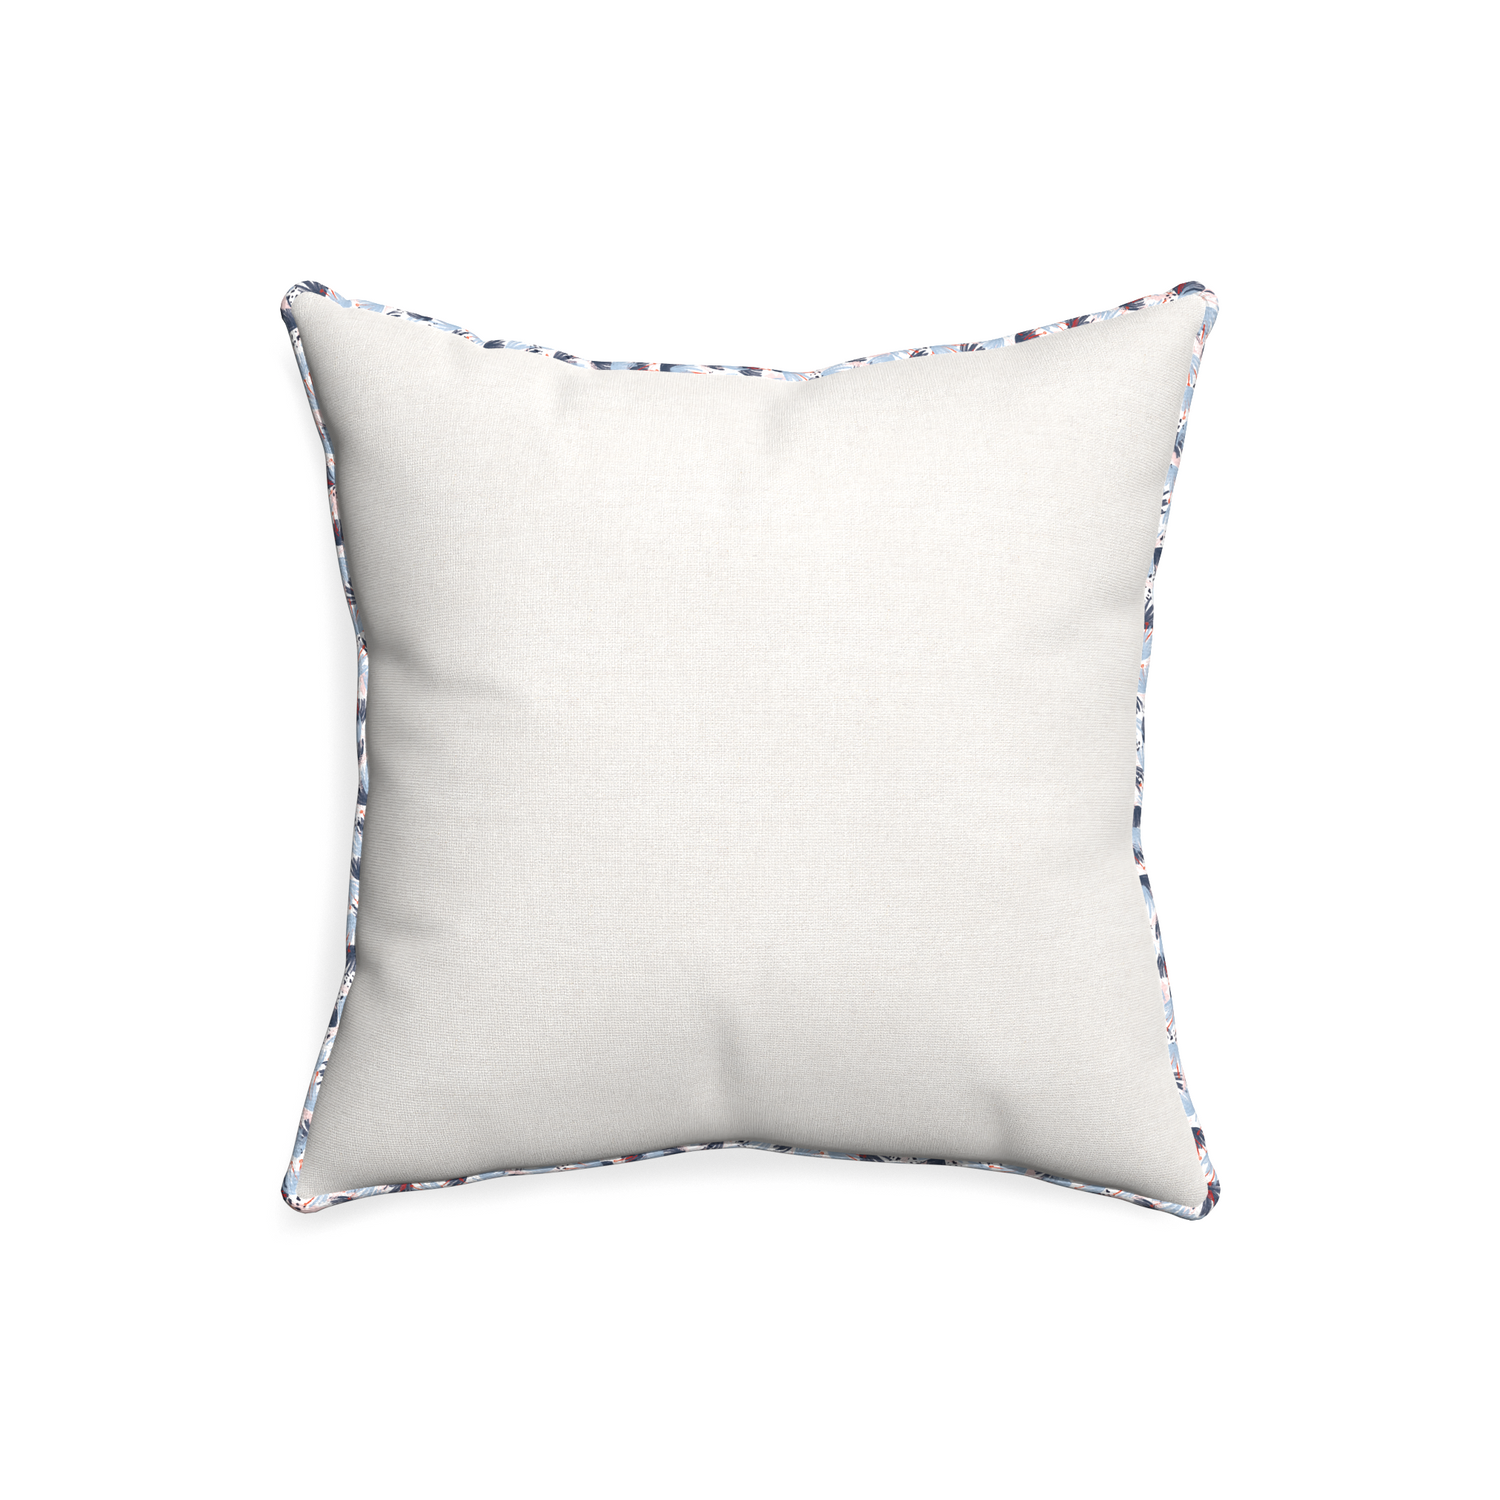 20-square flour custom pillow with e piping on white background